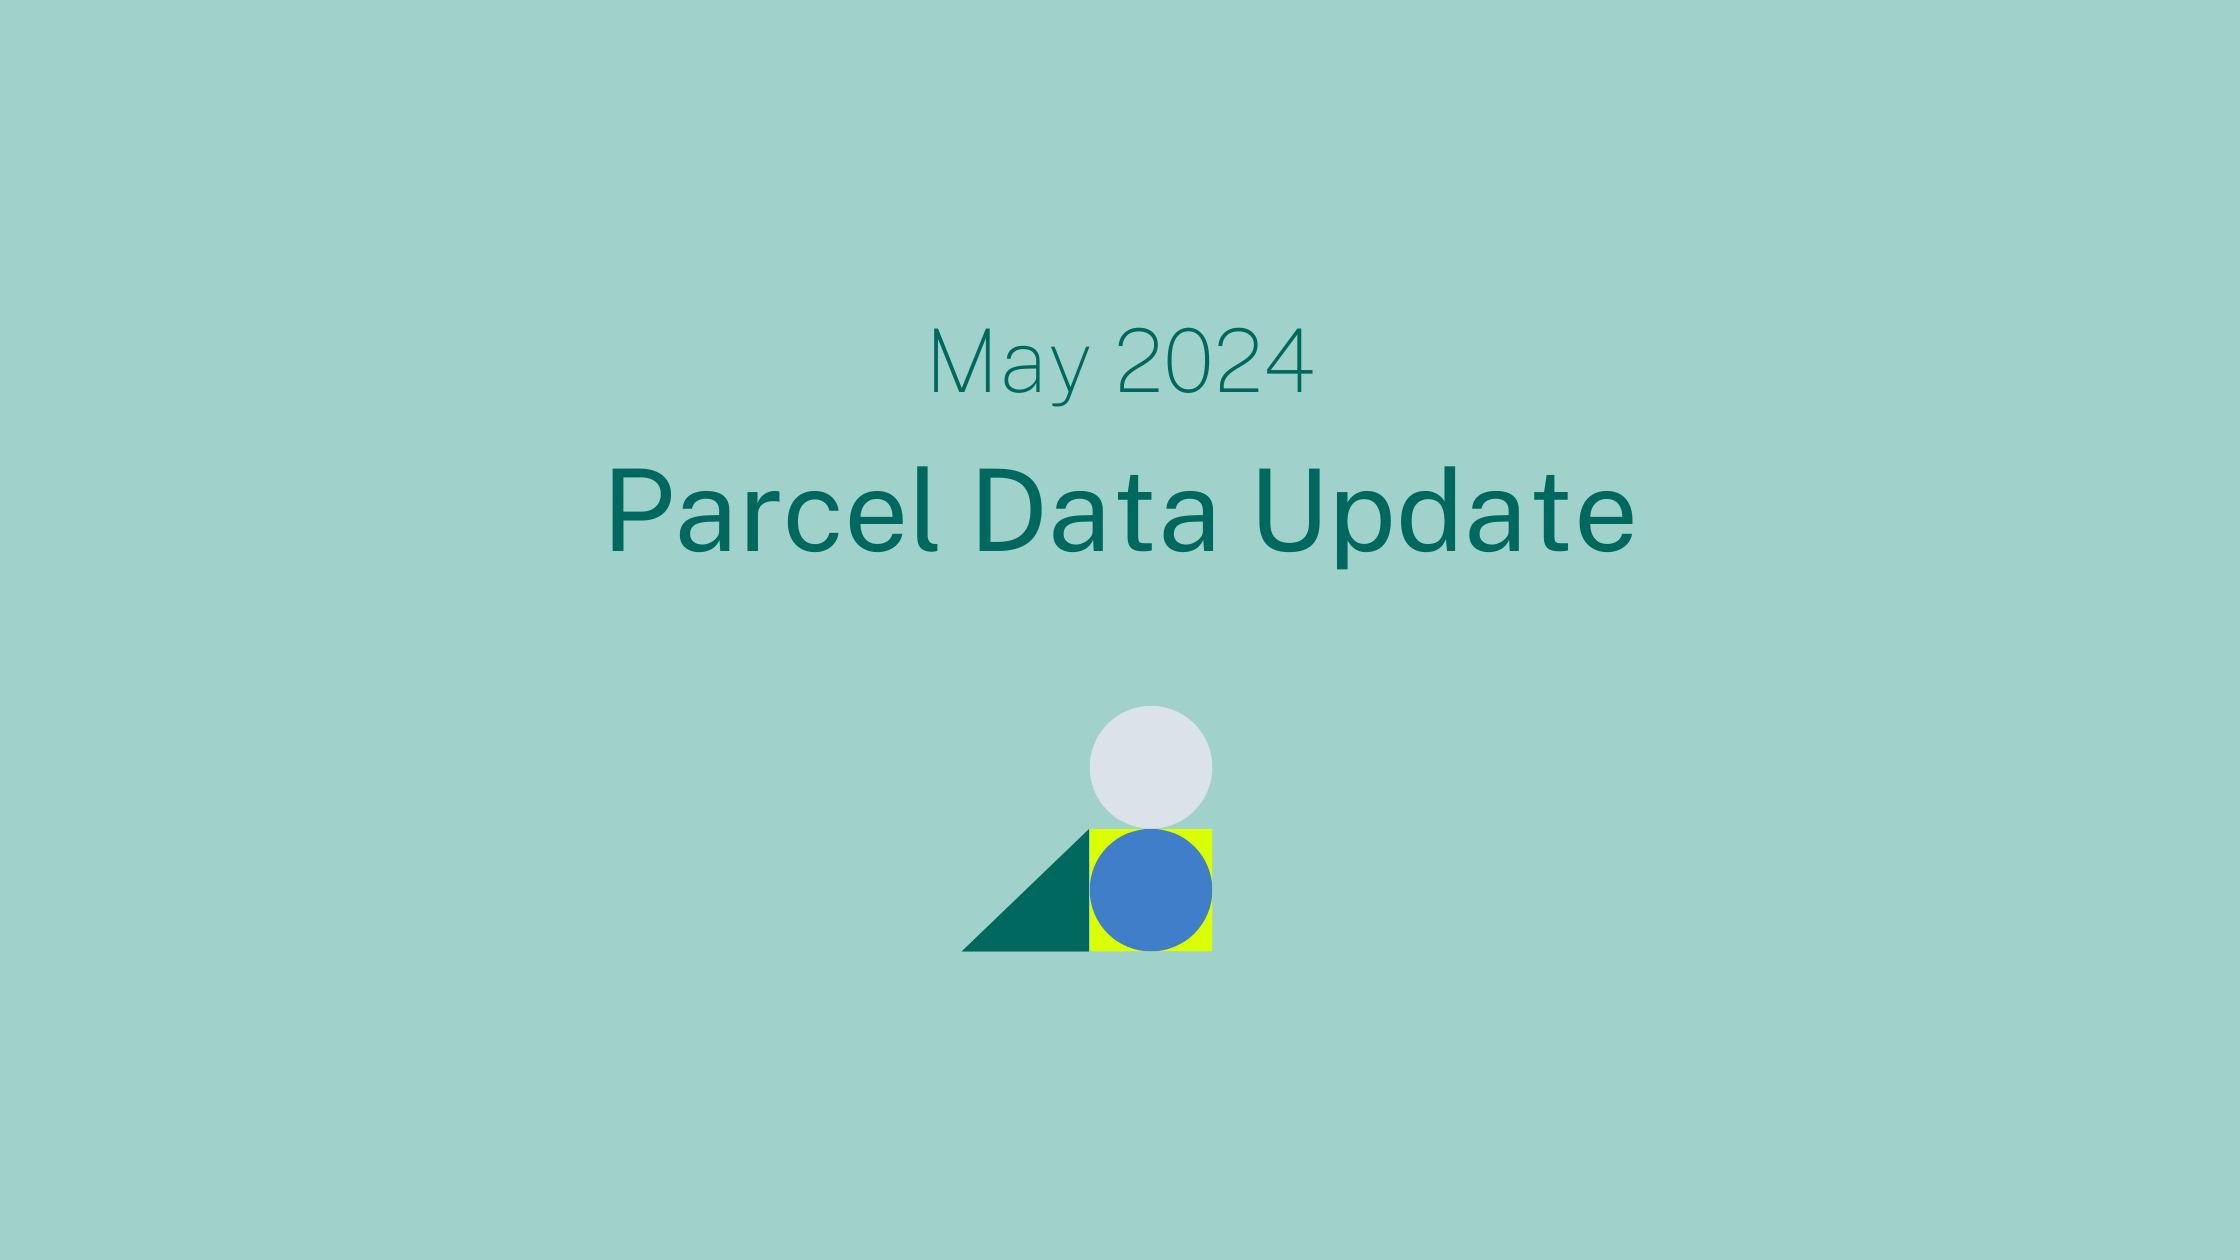 May 2024 Parcel Data Update